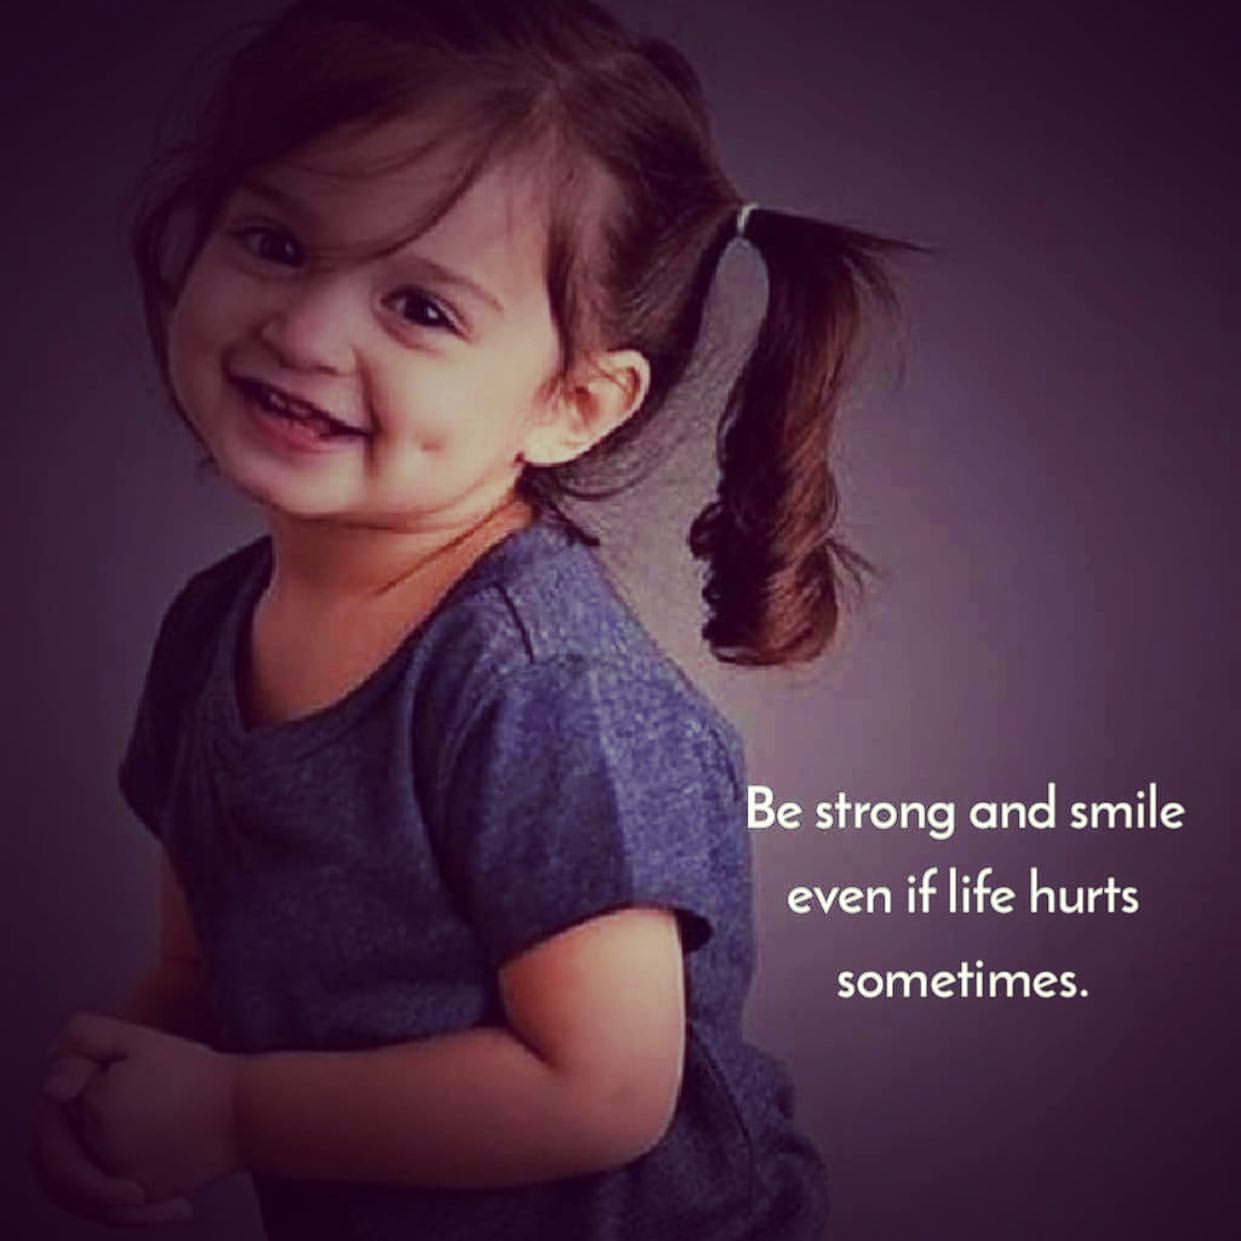 Be strong and smile even if life hurts sometimes.